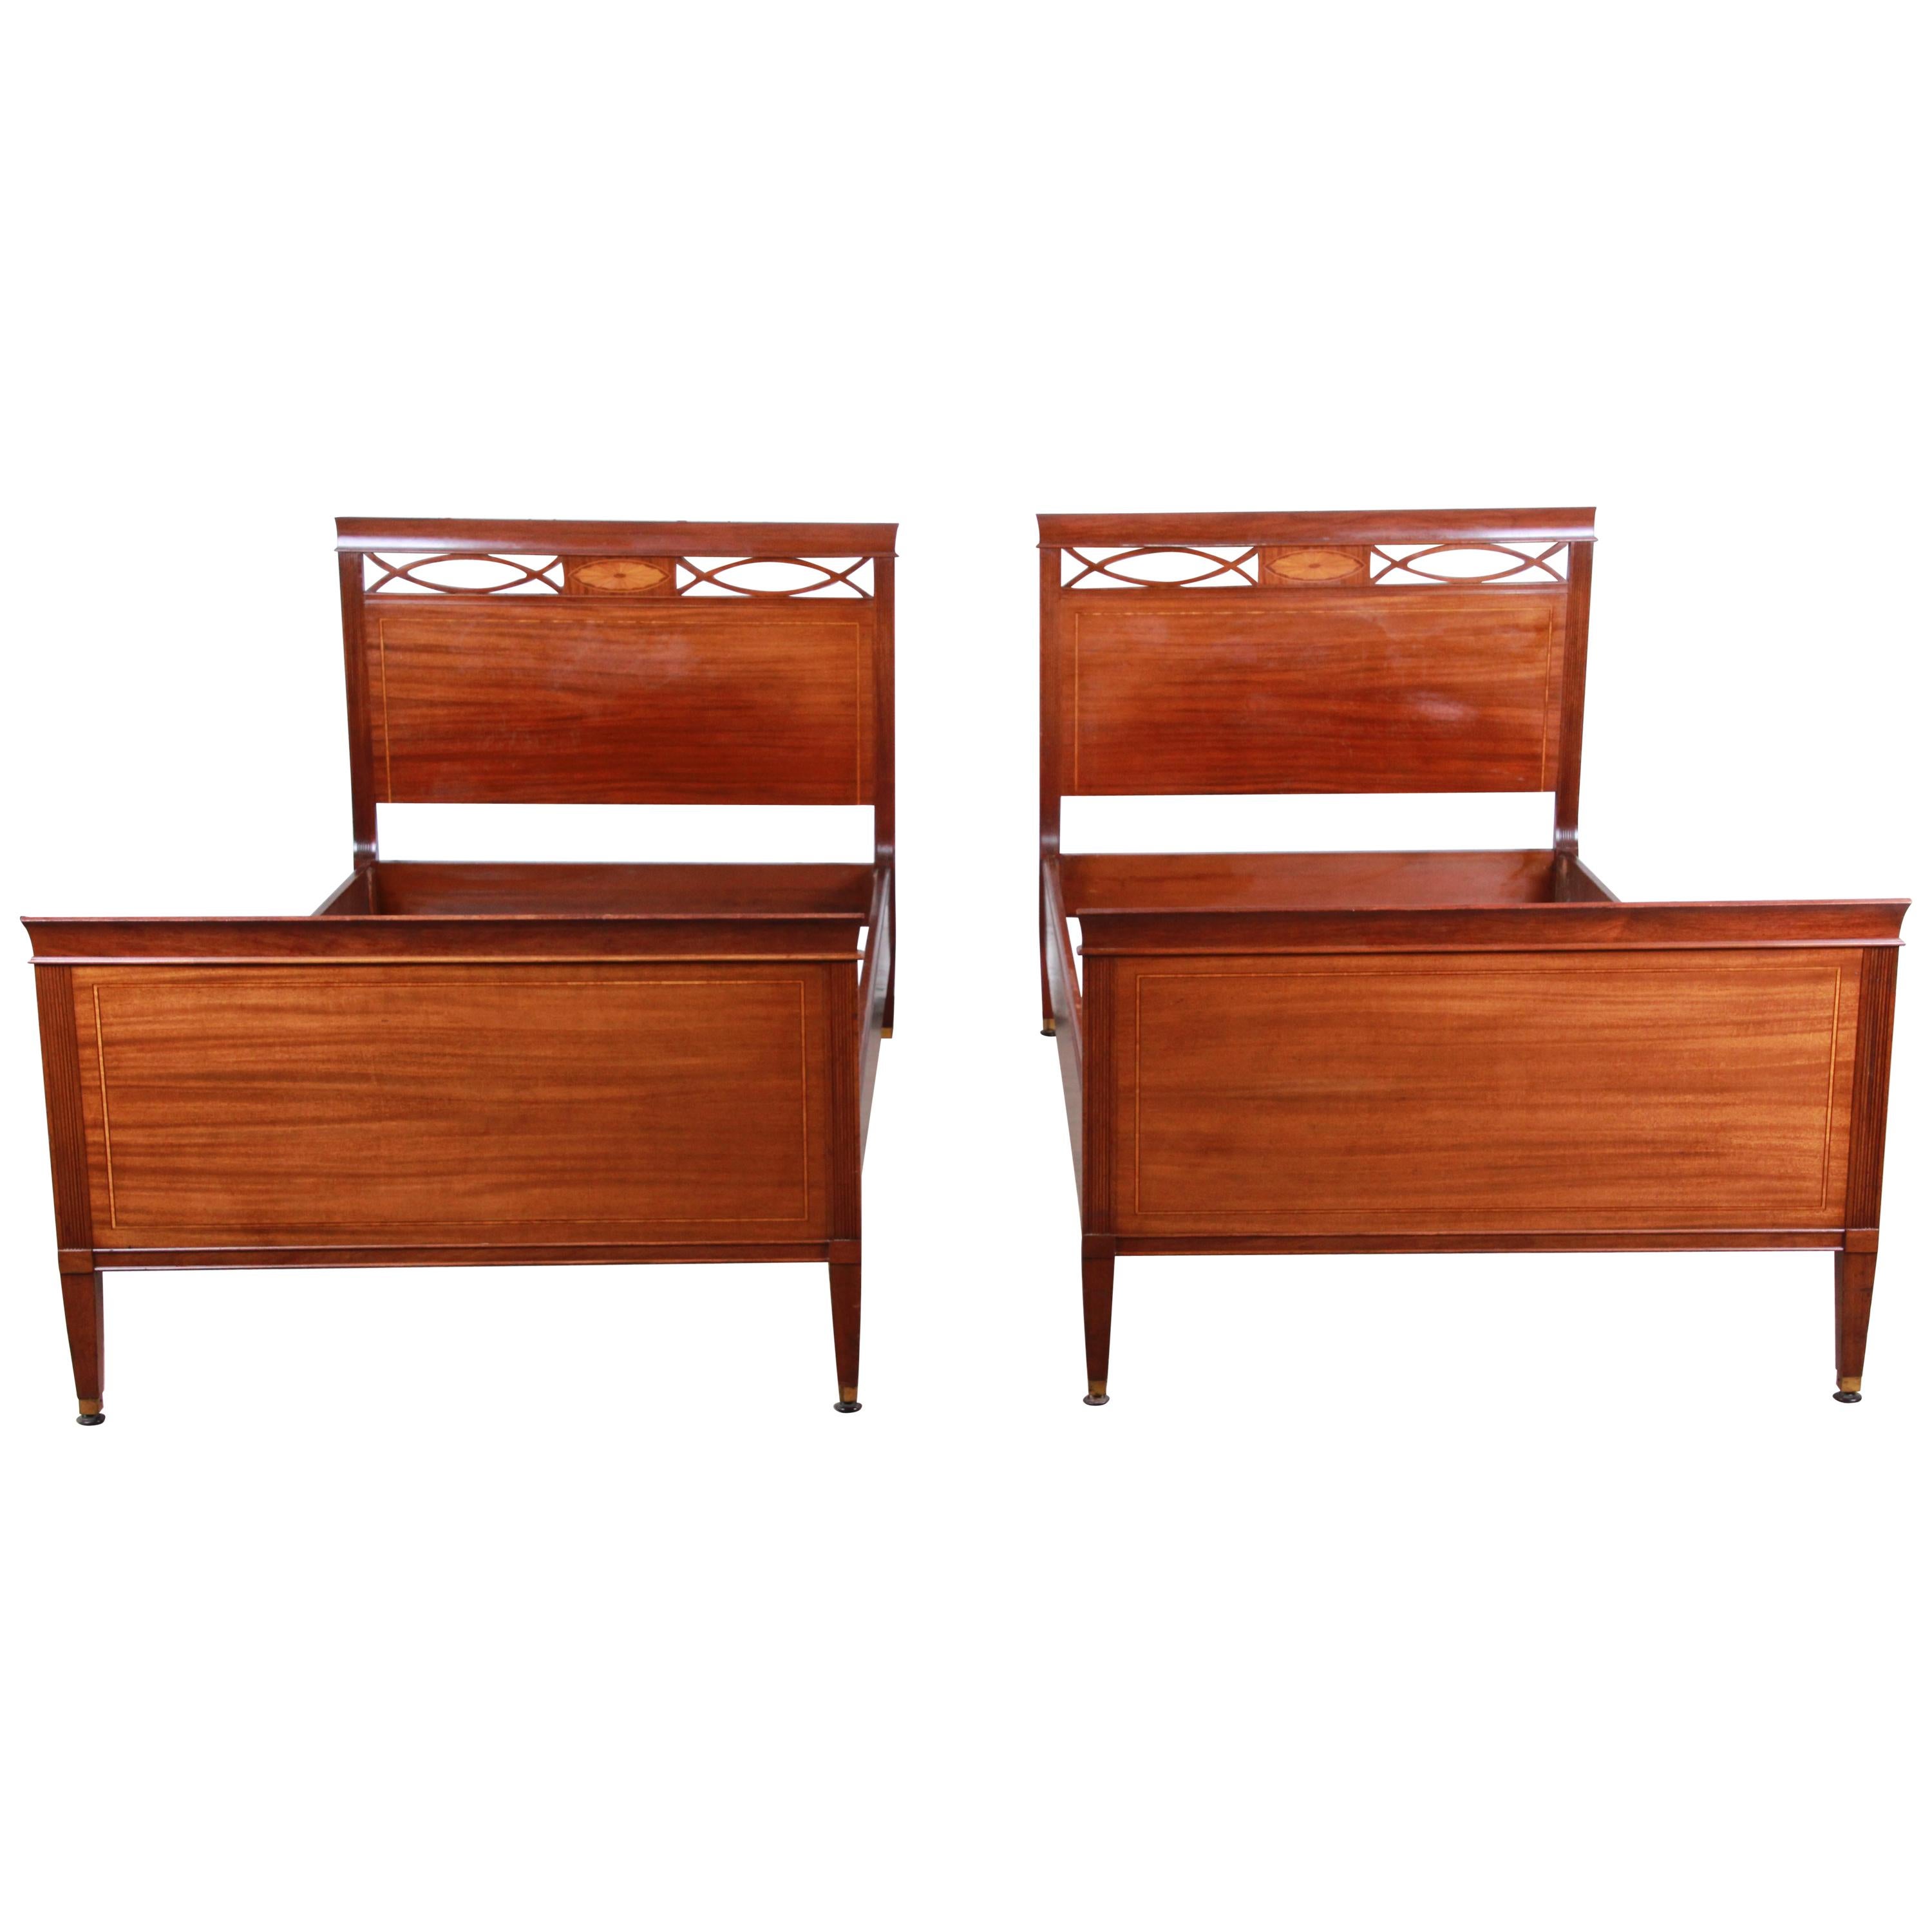 Pair of Inlaid Mahogany Federal Style Twin Beds by Kindel Furniture